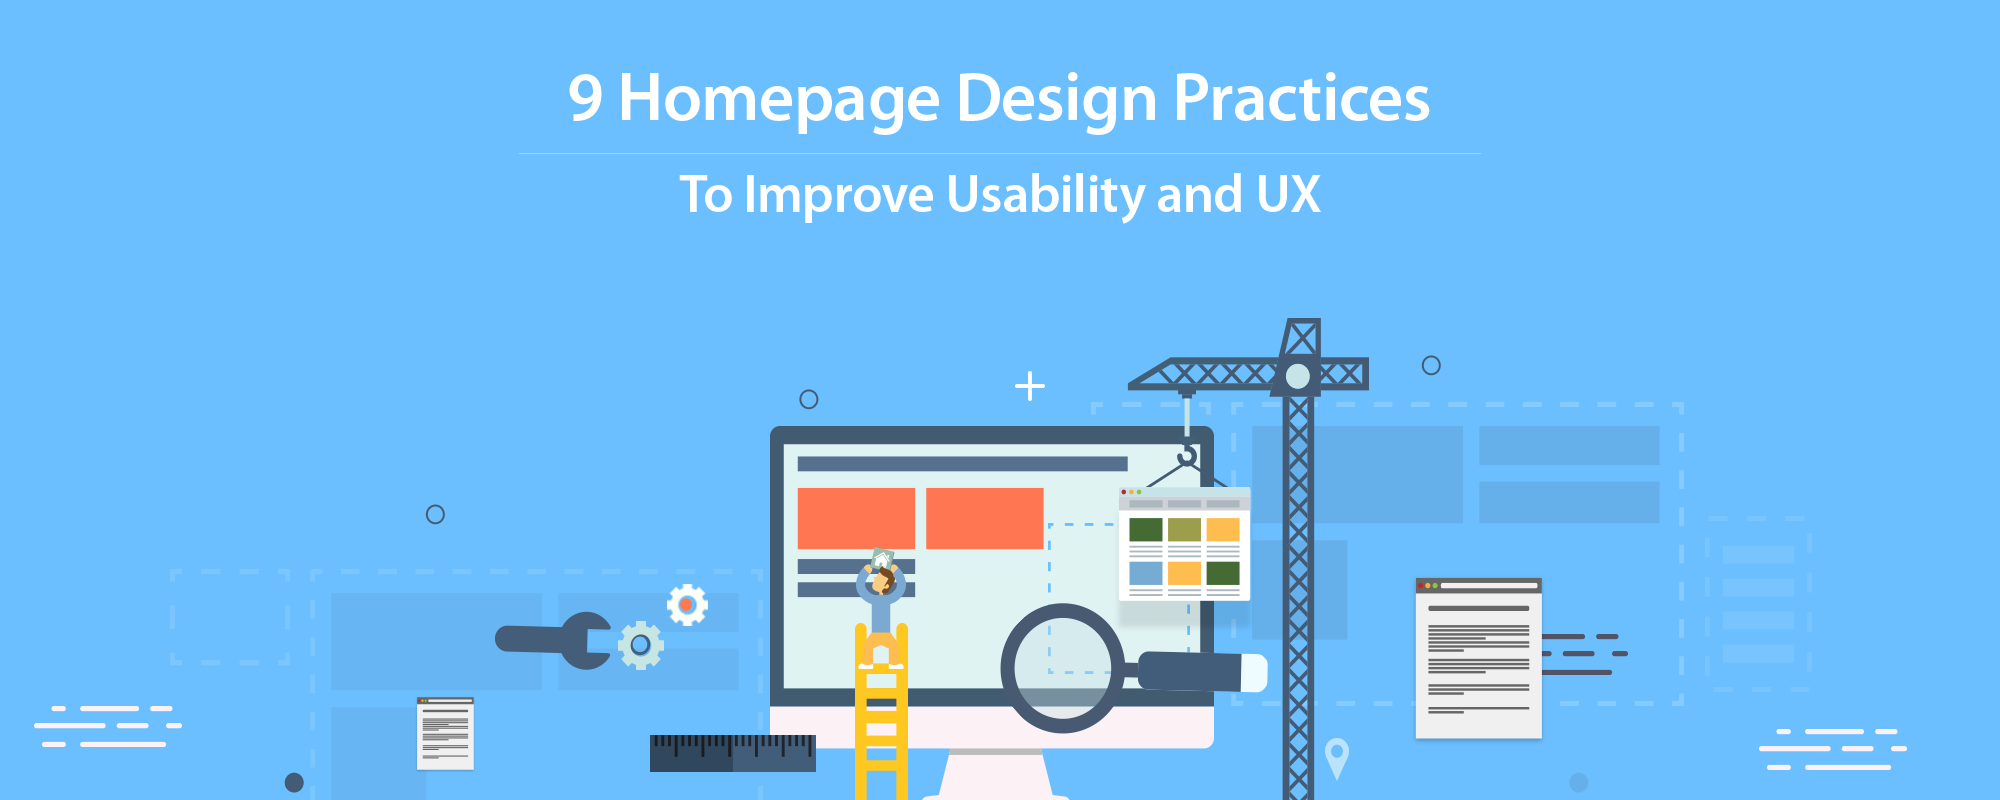 9 Homepage Design Practices to Improve Usability and UX